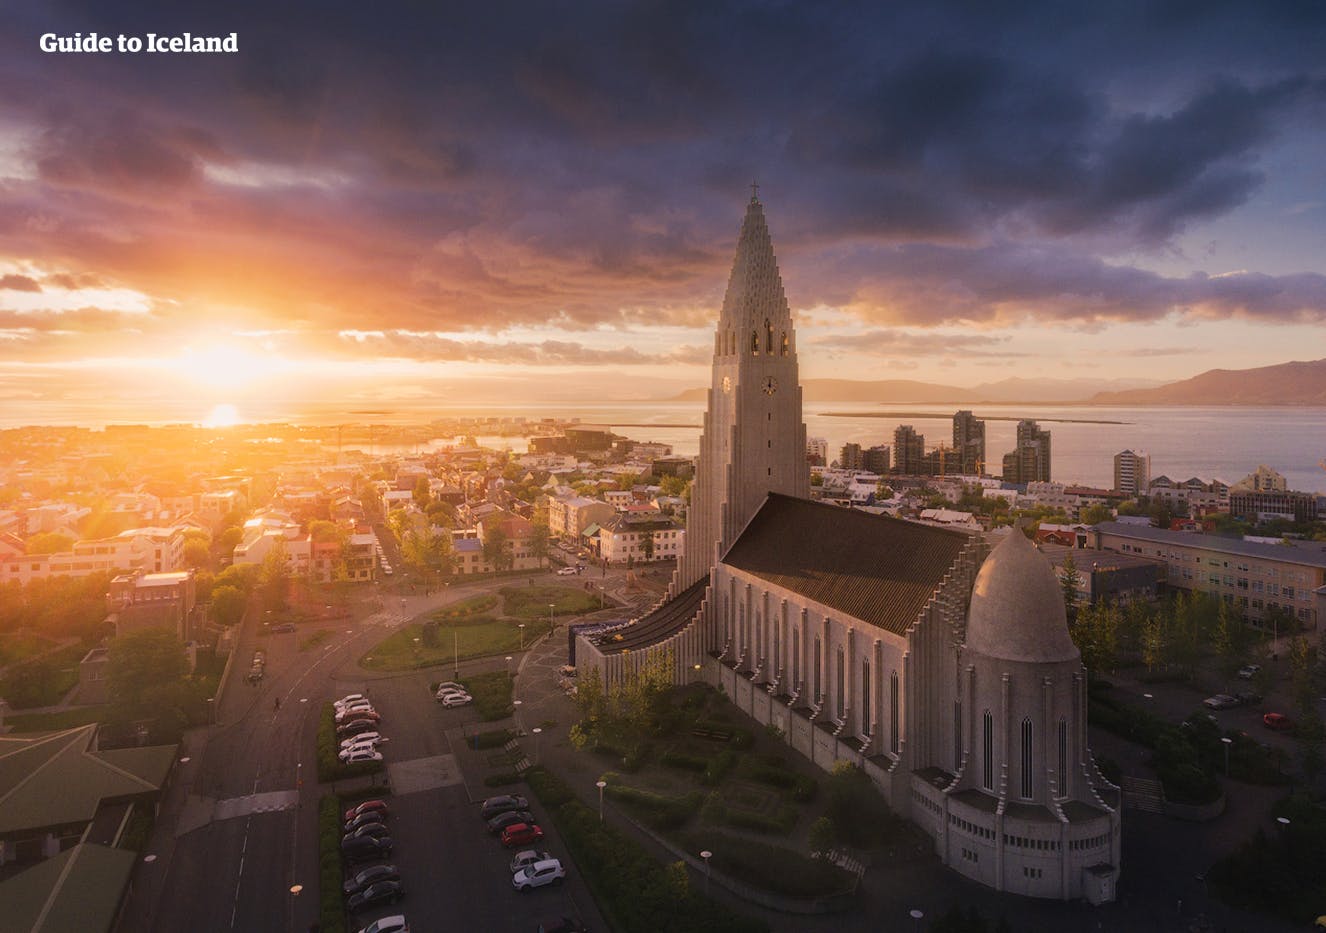 Reykjavík is a colourful, cultural and quirky capital city.